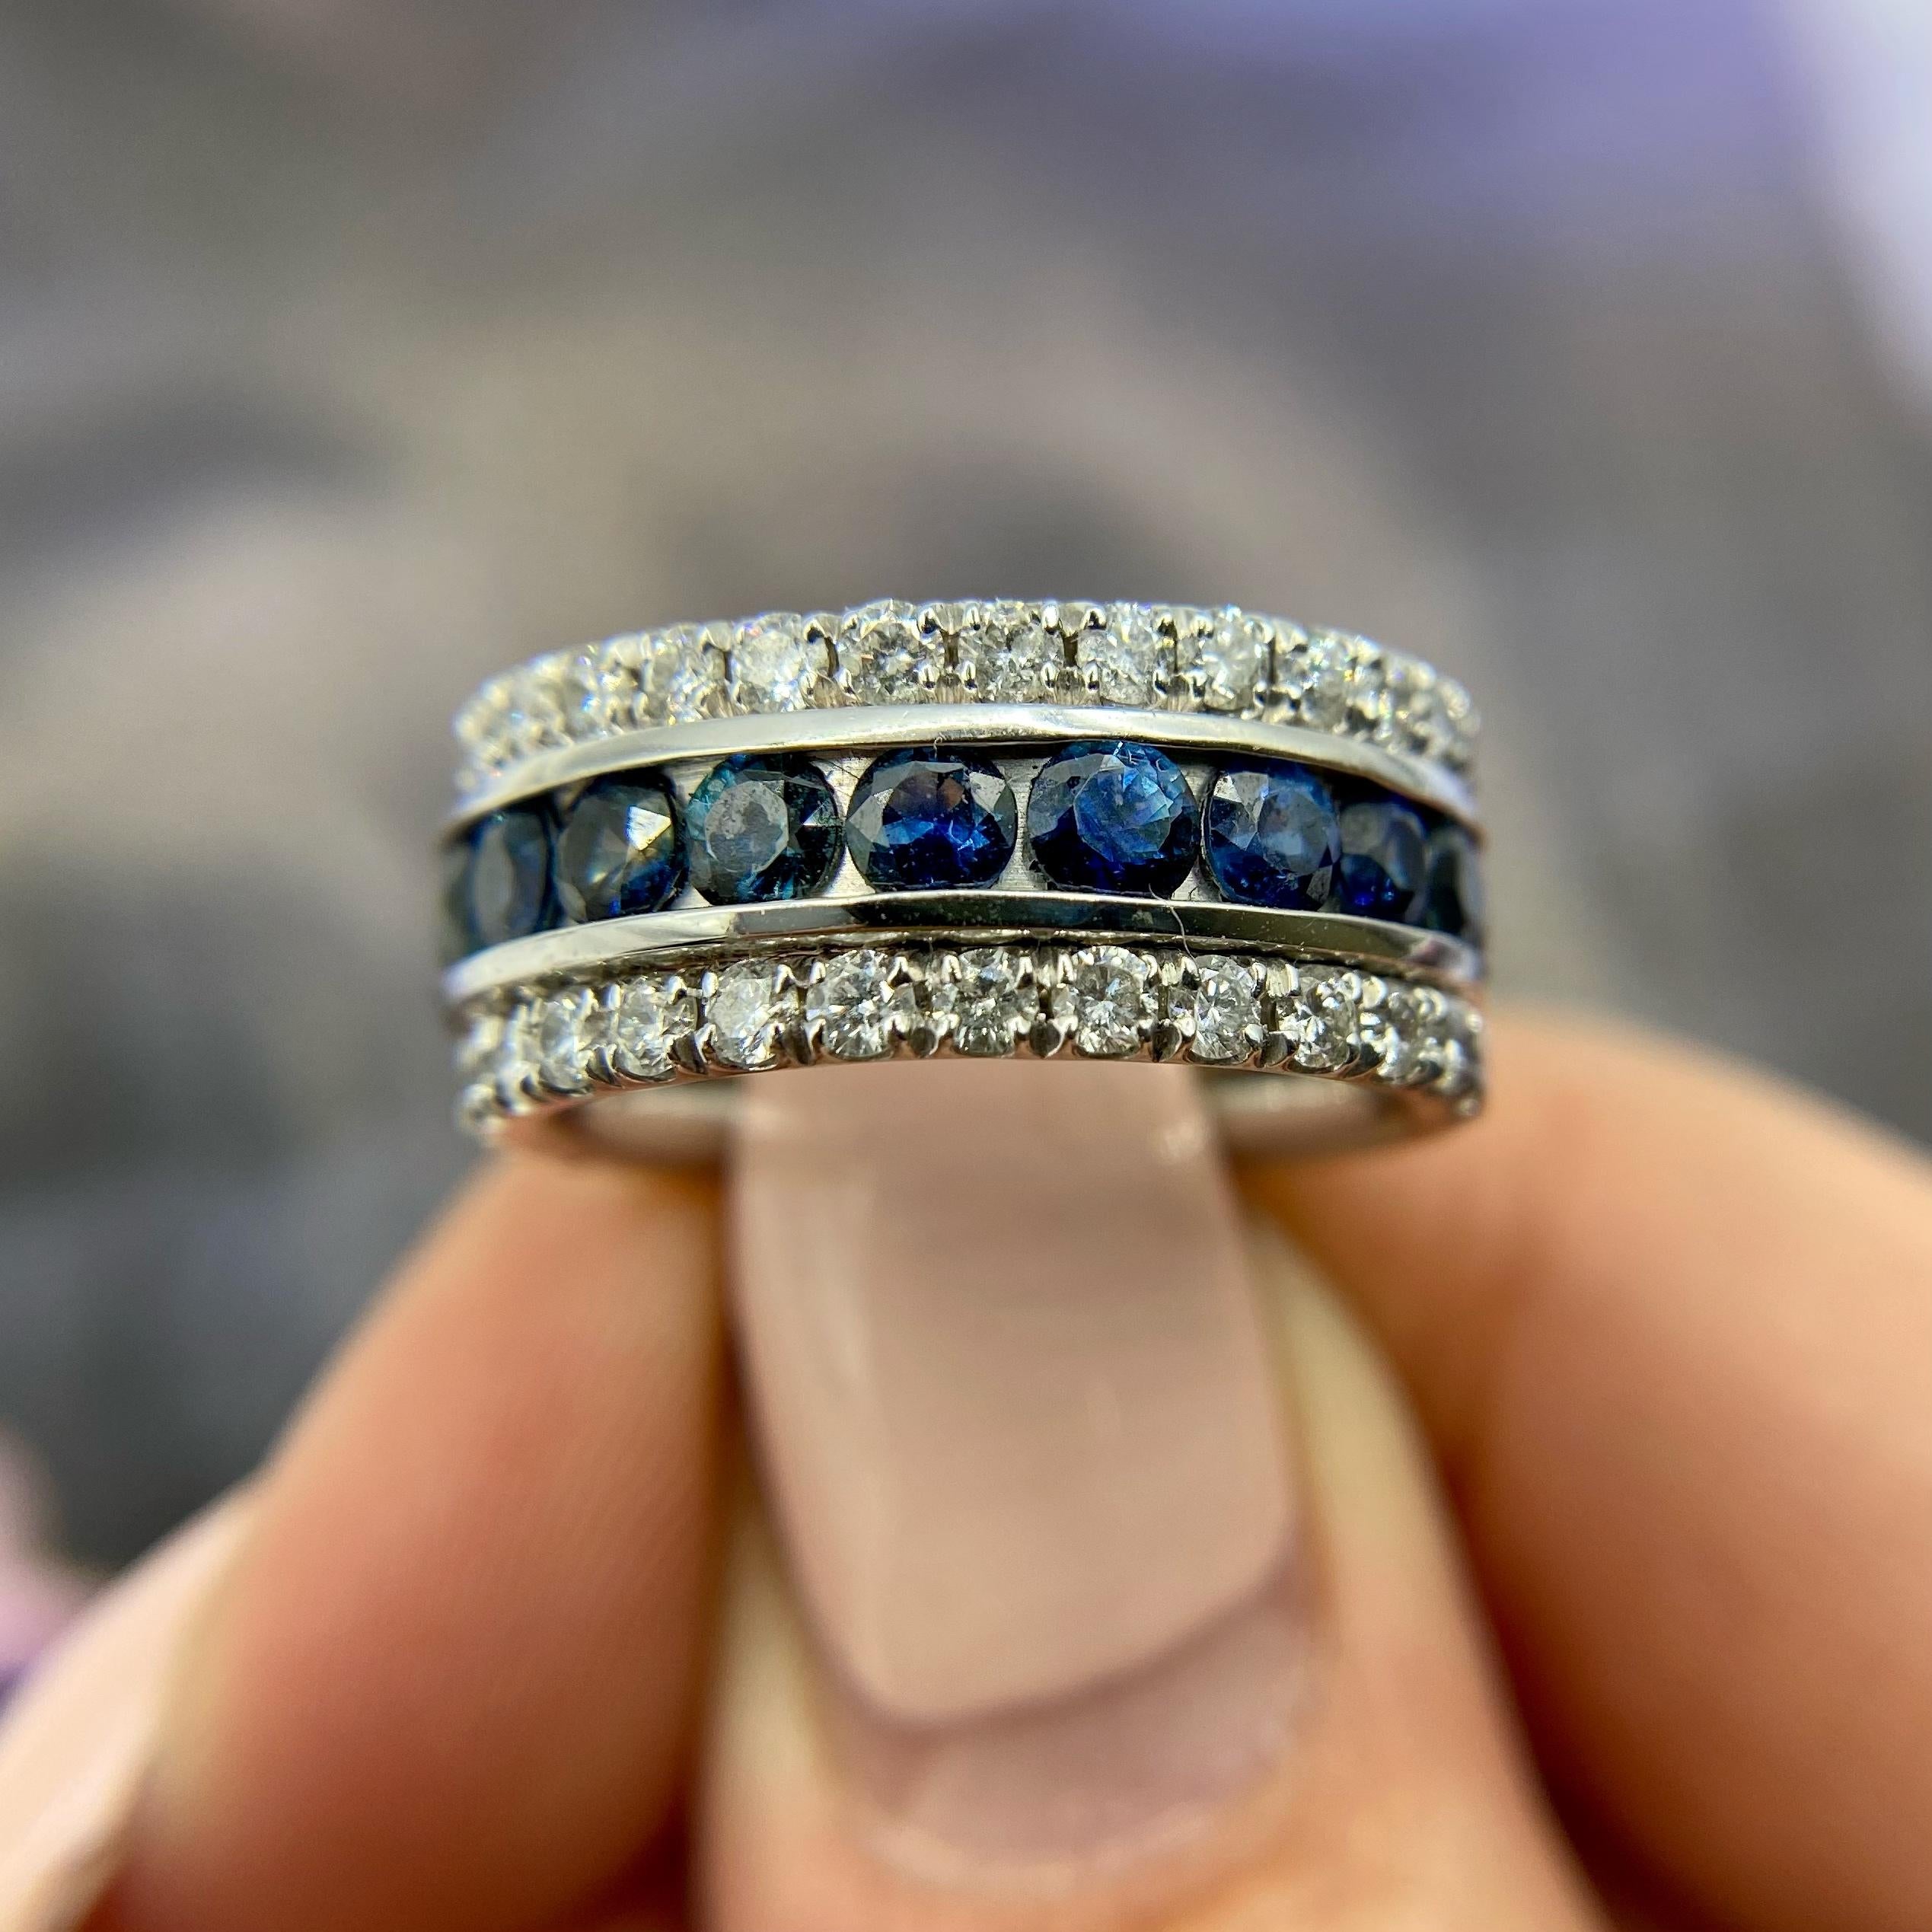 For Sale:  14k White Gold Cocktail Ring Features 1.60ct. Diamonds 5